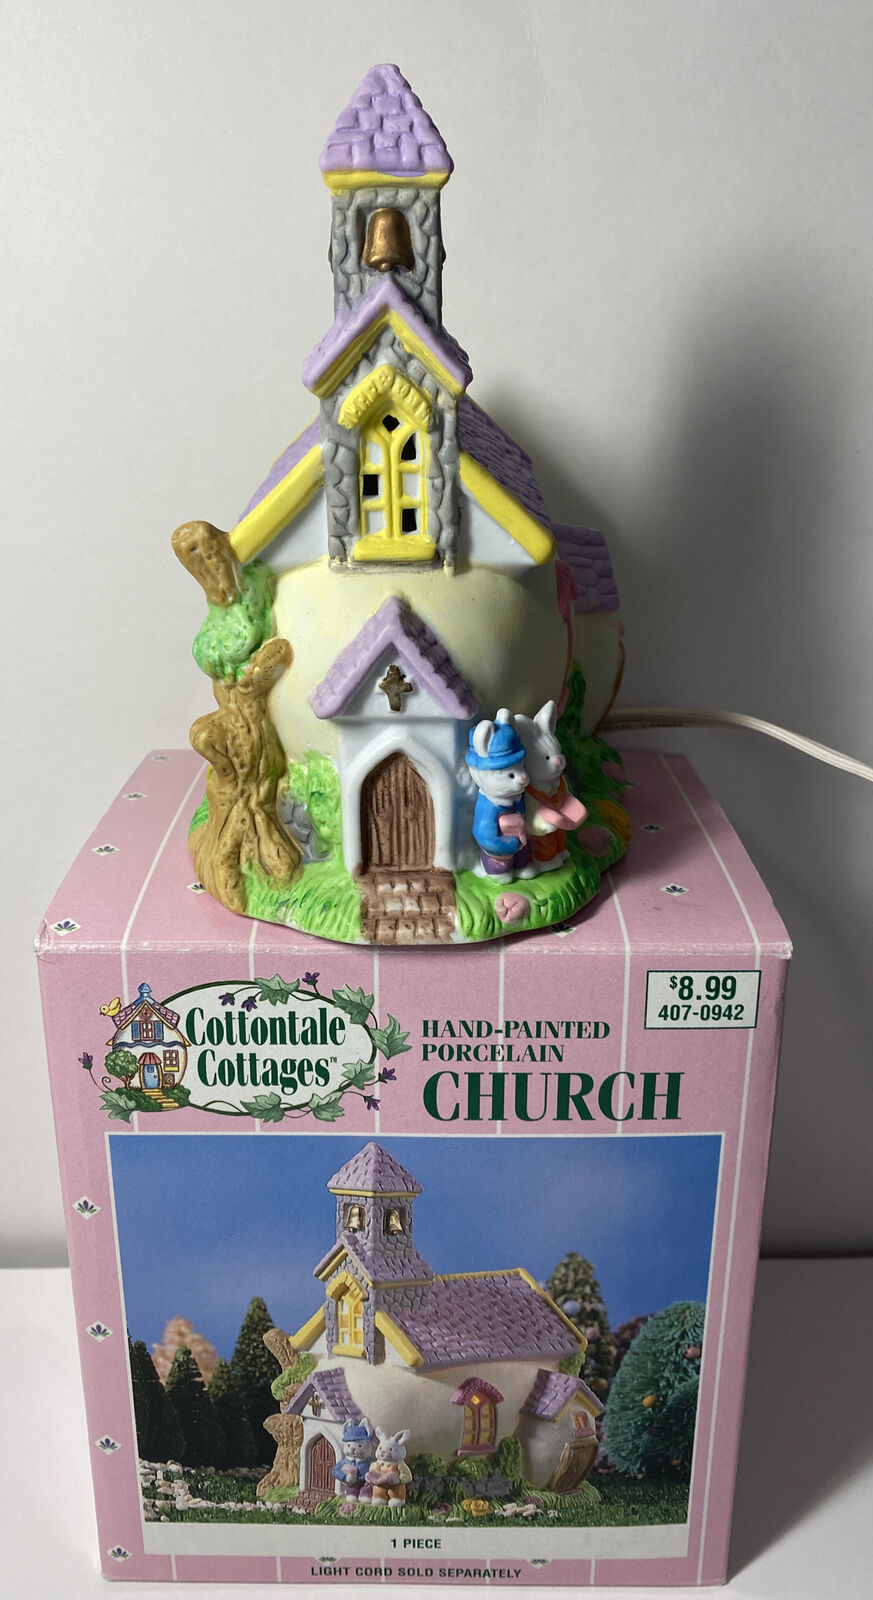 1999 Cottontale Cottages Church In Box, Includes Cord